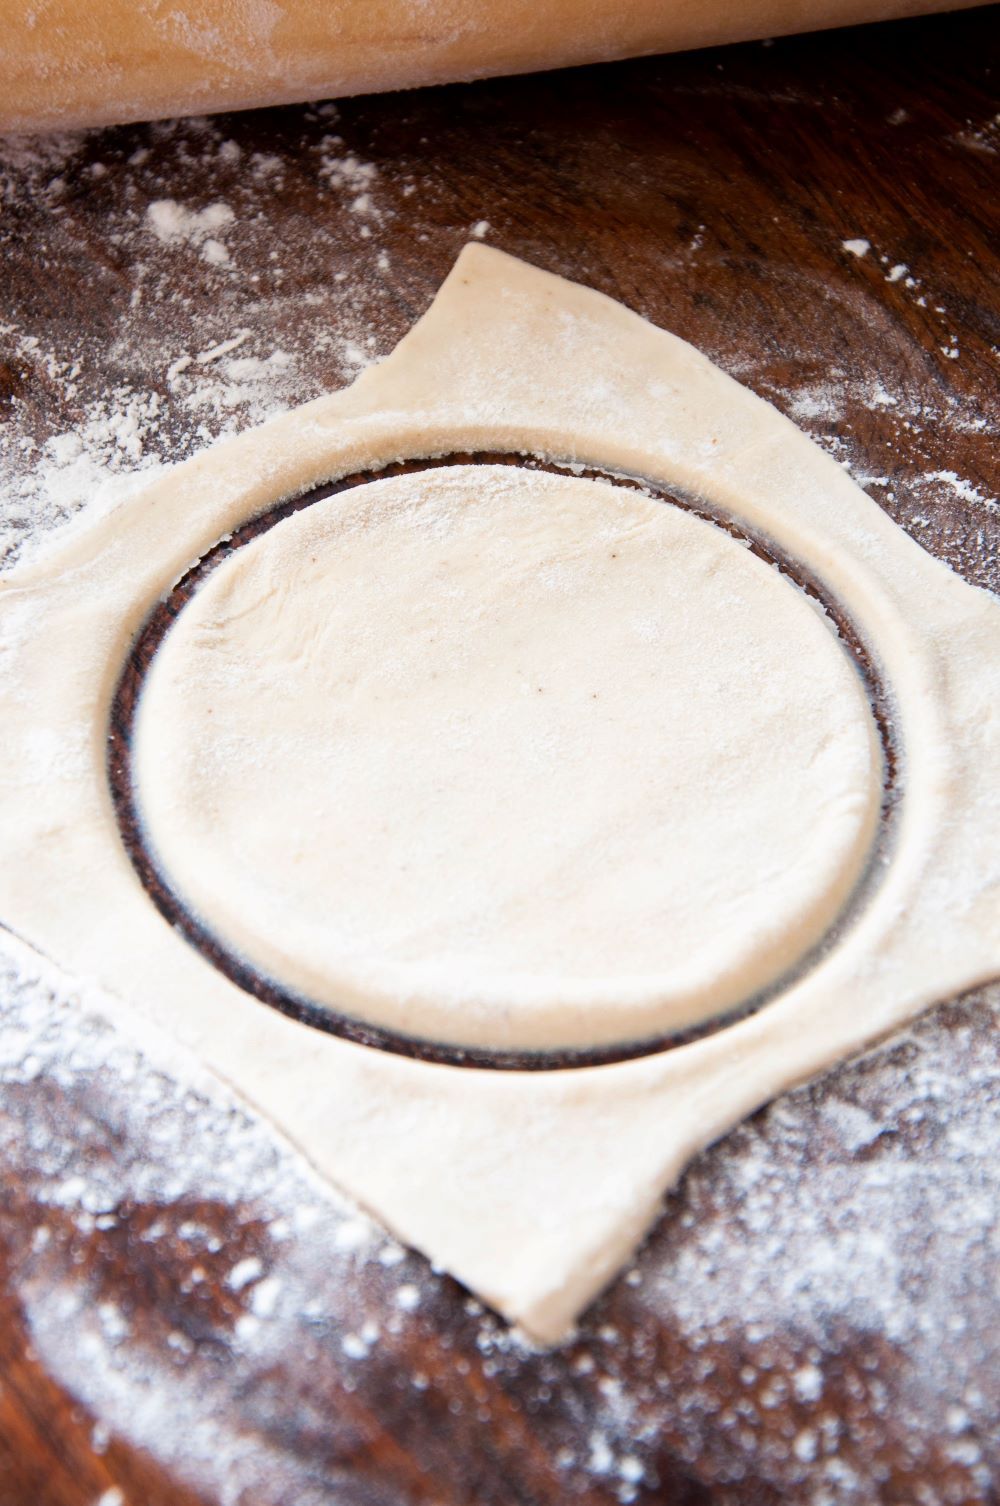 Cutting out circle from the dough